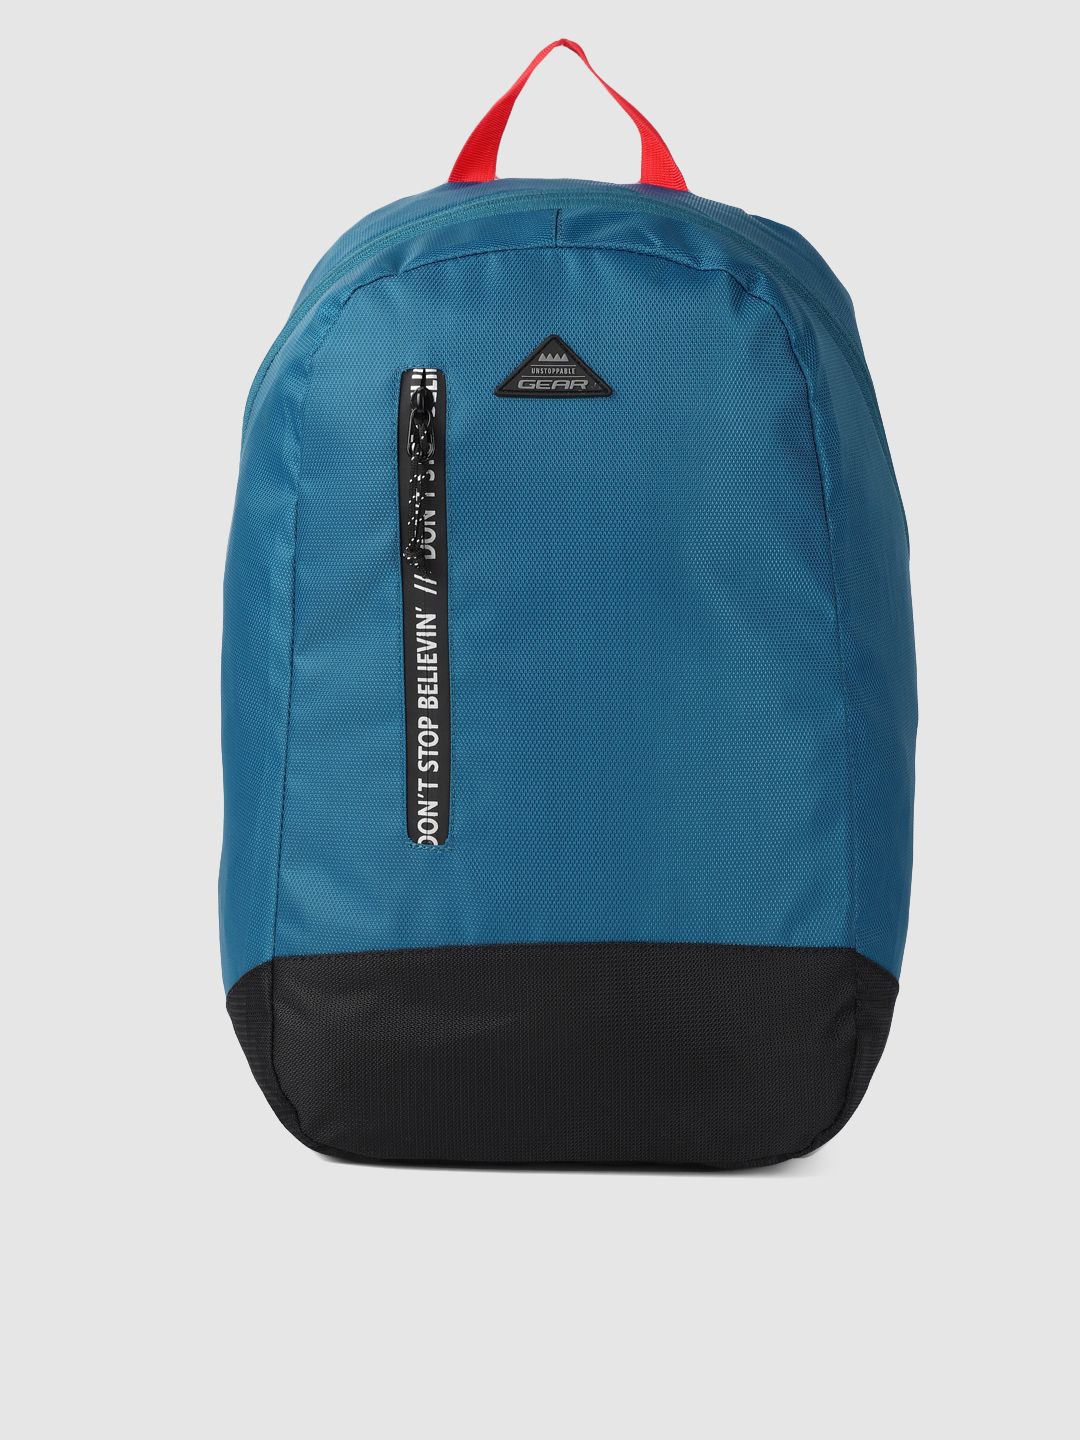 Gear Unisex Blue & Black Colourblocked Superior Backpack Price in India